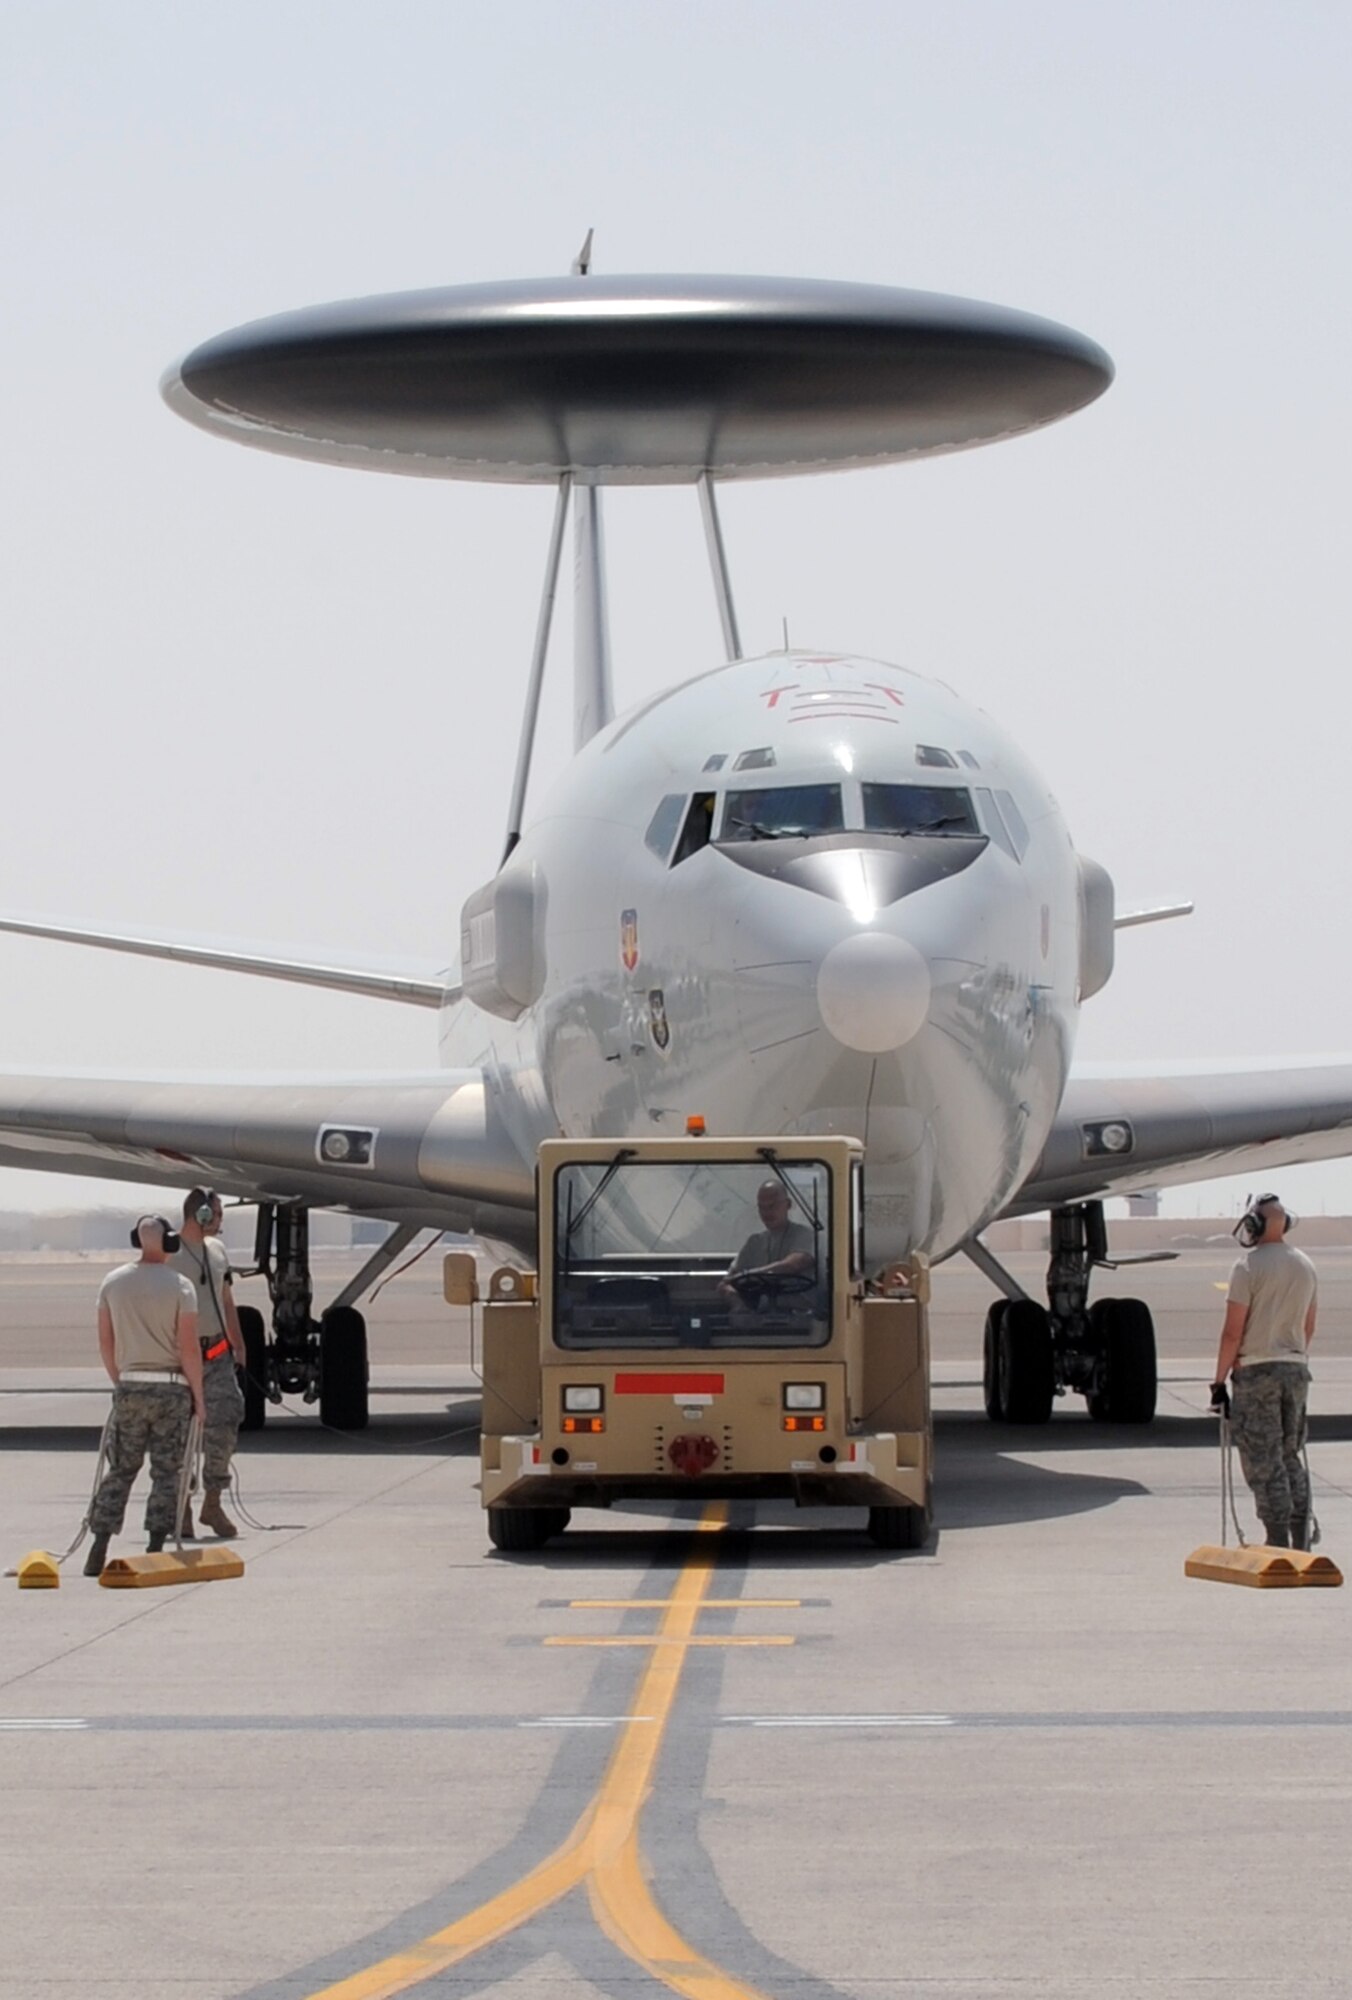 Airmen assigned to the 380th Expeditionary Aircraft Maintenance Squadron's Sentry aircraft maintenance unit move an E-3 Sentry Airborne Warning and Control System, or AWACS, aircraft into a parking space on the flightline of a non-disclosed base in Southwest Asia on March 23, 2010. The action comes 33 years to the day when the Air Force received its first E-3 Sentry into its inventory on March 23, 1977. This E-3, assigned to the 965th Expeditionary Airborne Air Control Squadron, along with the maintenance Airmen are deployed to Southwest Asia from the 552nd Air Control Wing at Tinker Air Force Base, Okla. (U.S. Air Force Photo/Master Sgt. Scott T. Sturkol/Released)